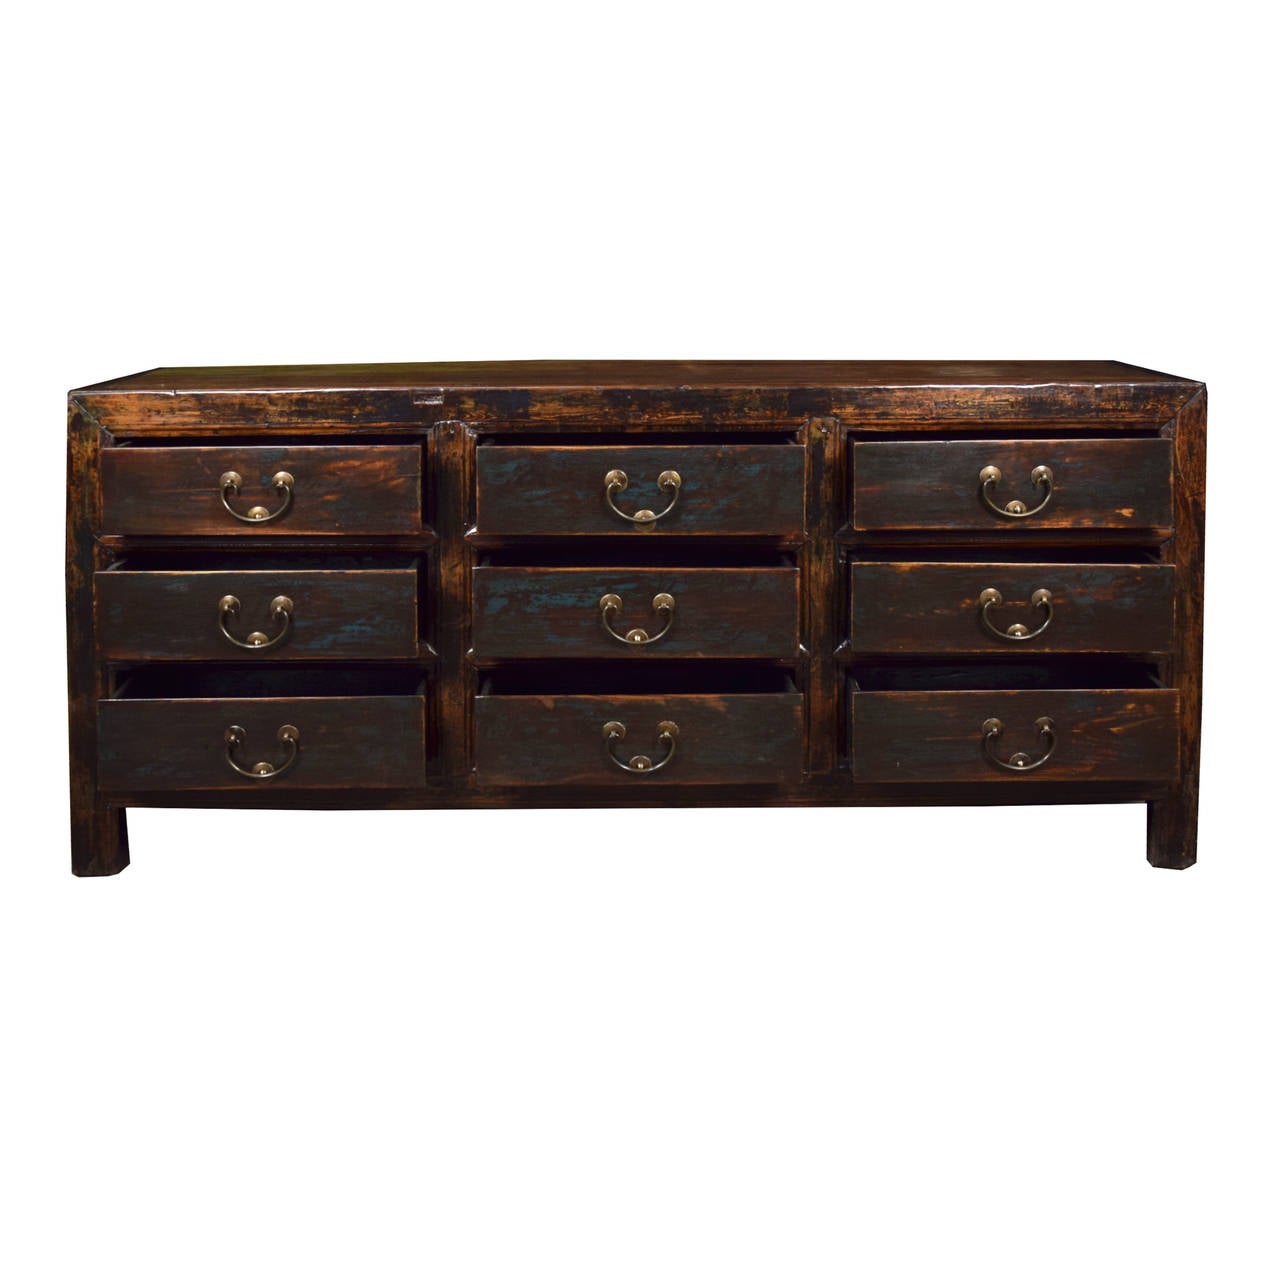 A chest from Shanxi province, China with nine drawers, circa 1850. This Chinese Northern elm piece retains a faint teal lacquer on the front.

